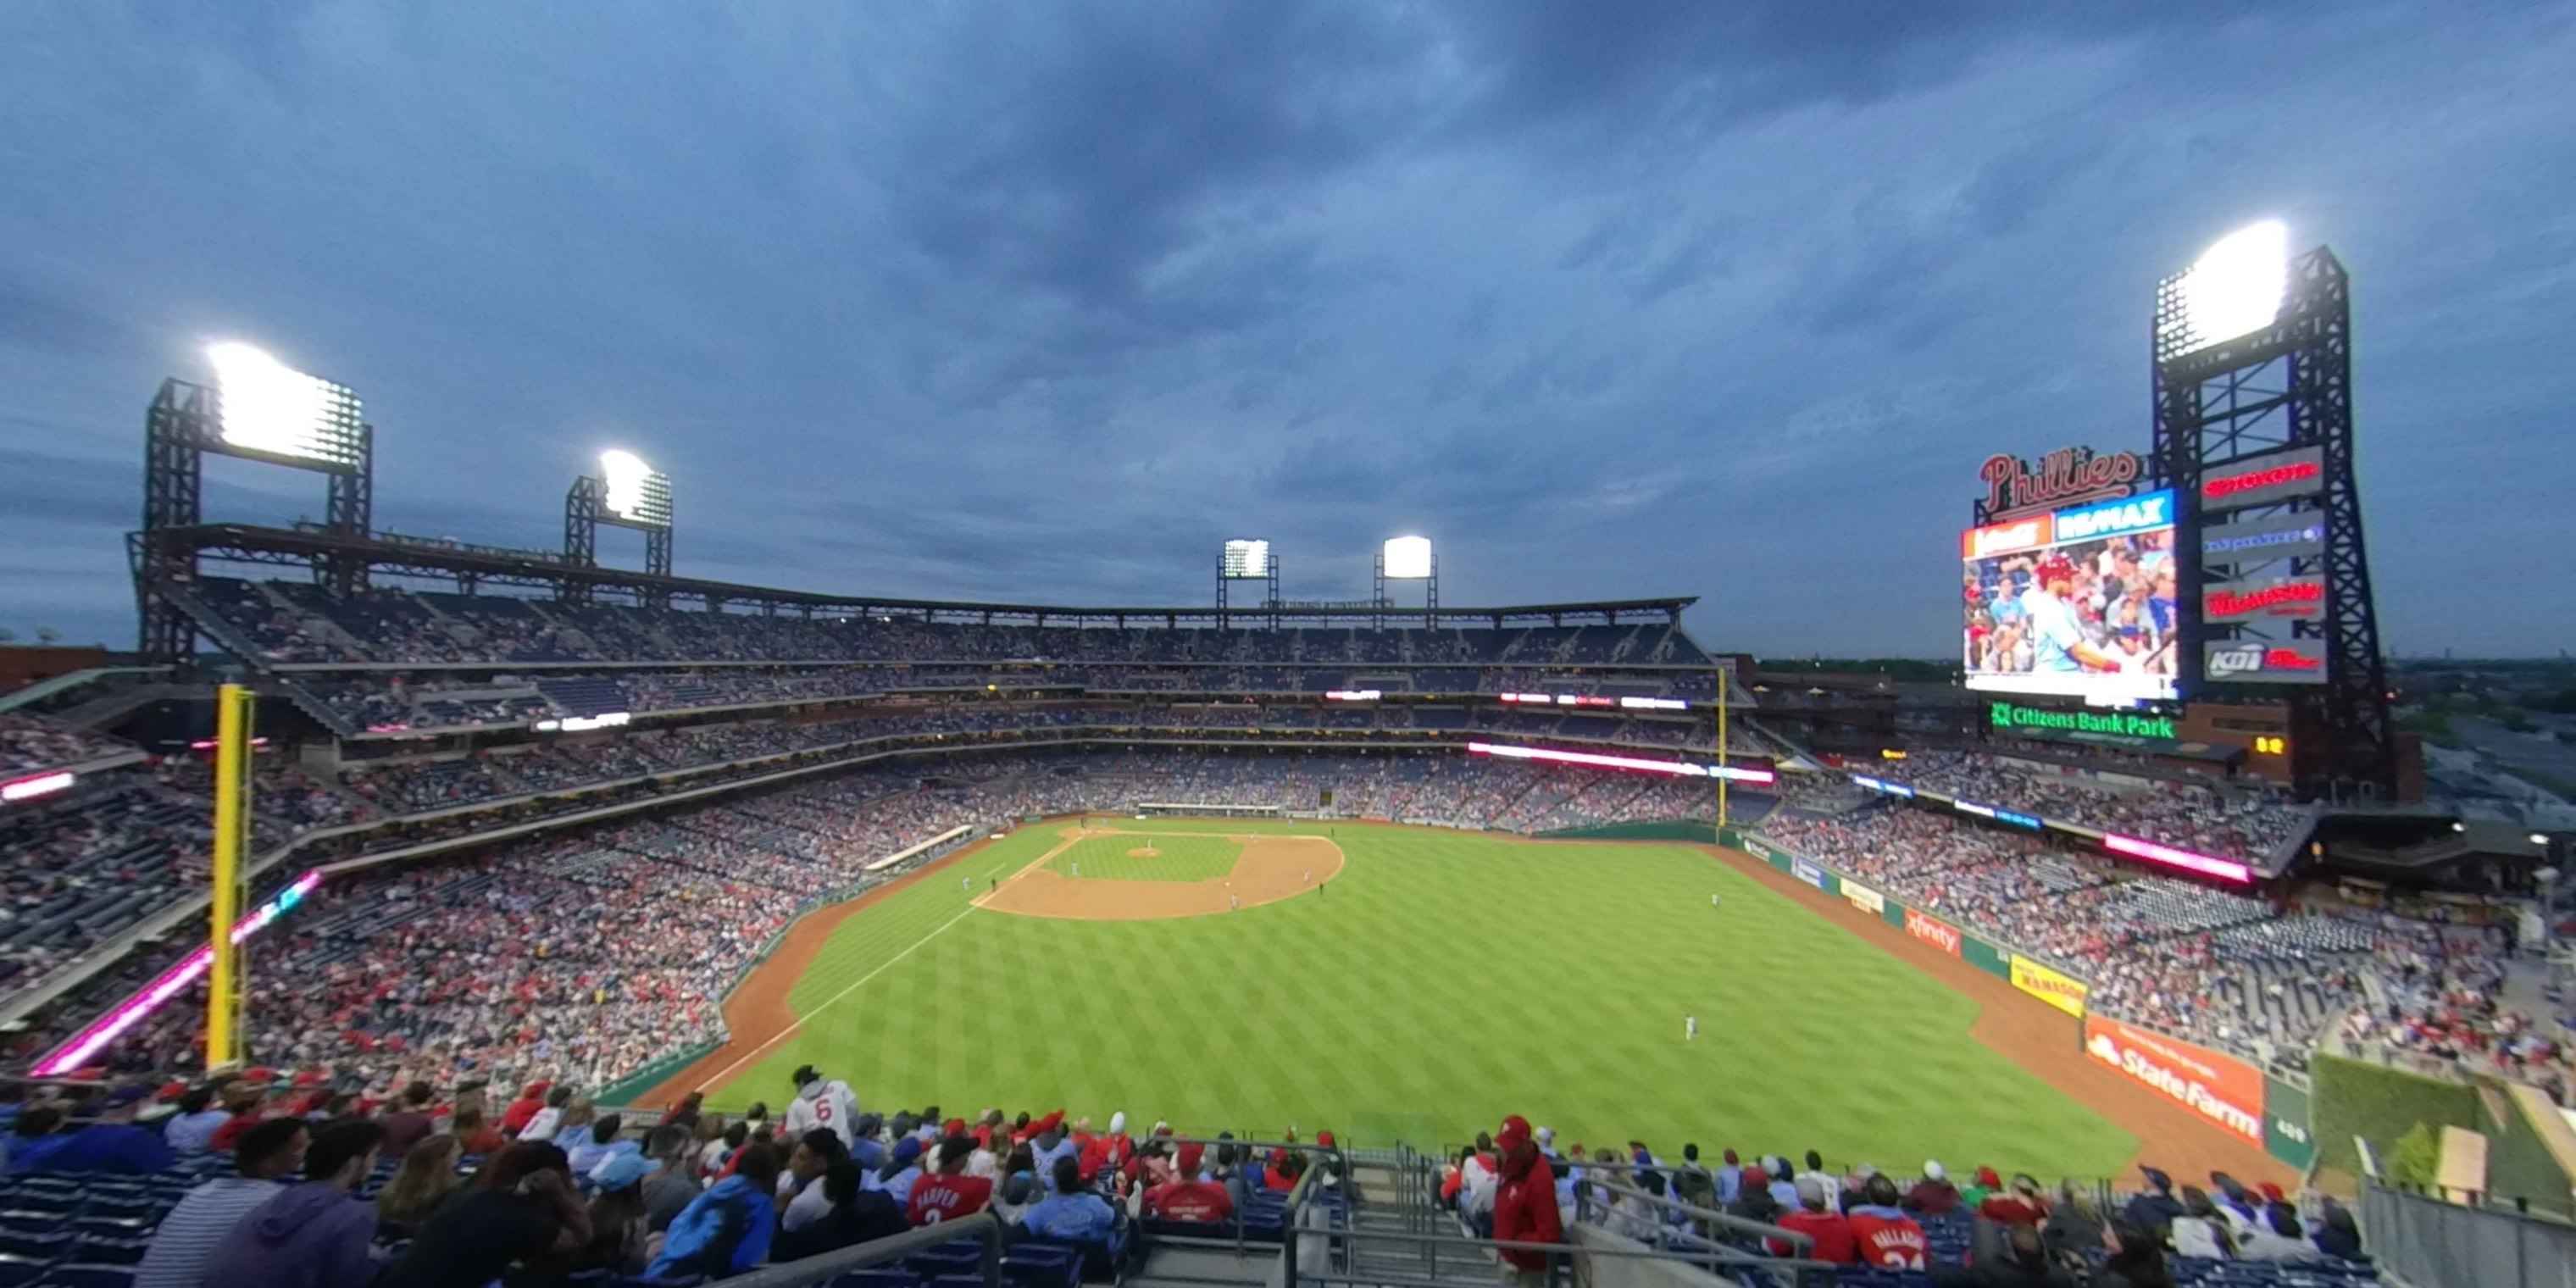 section 301 panoramic seat view  for baseball - citizens bank park